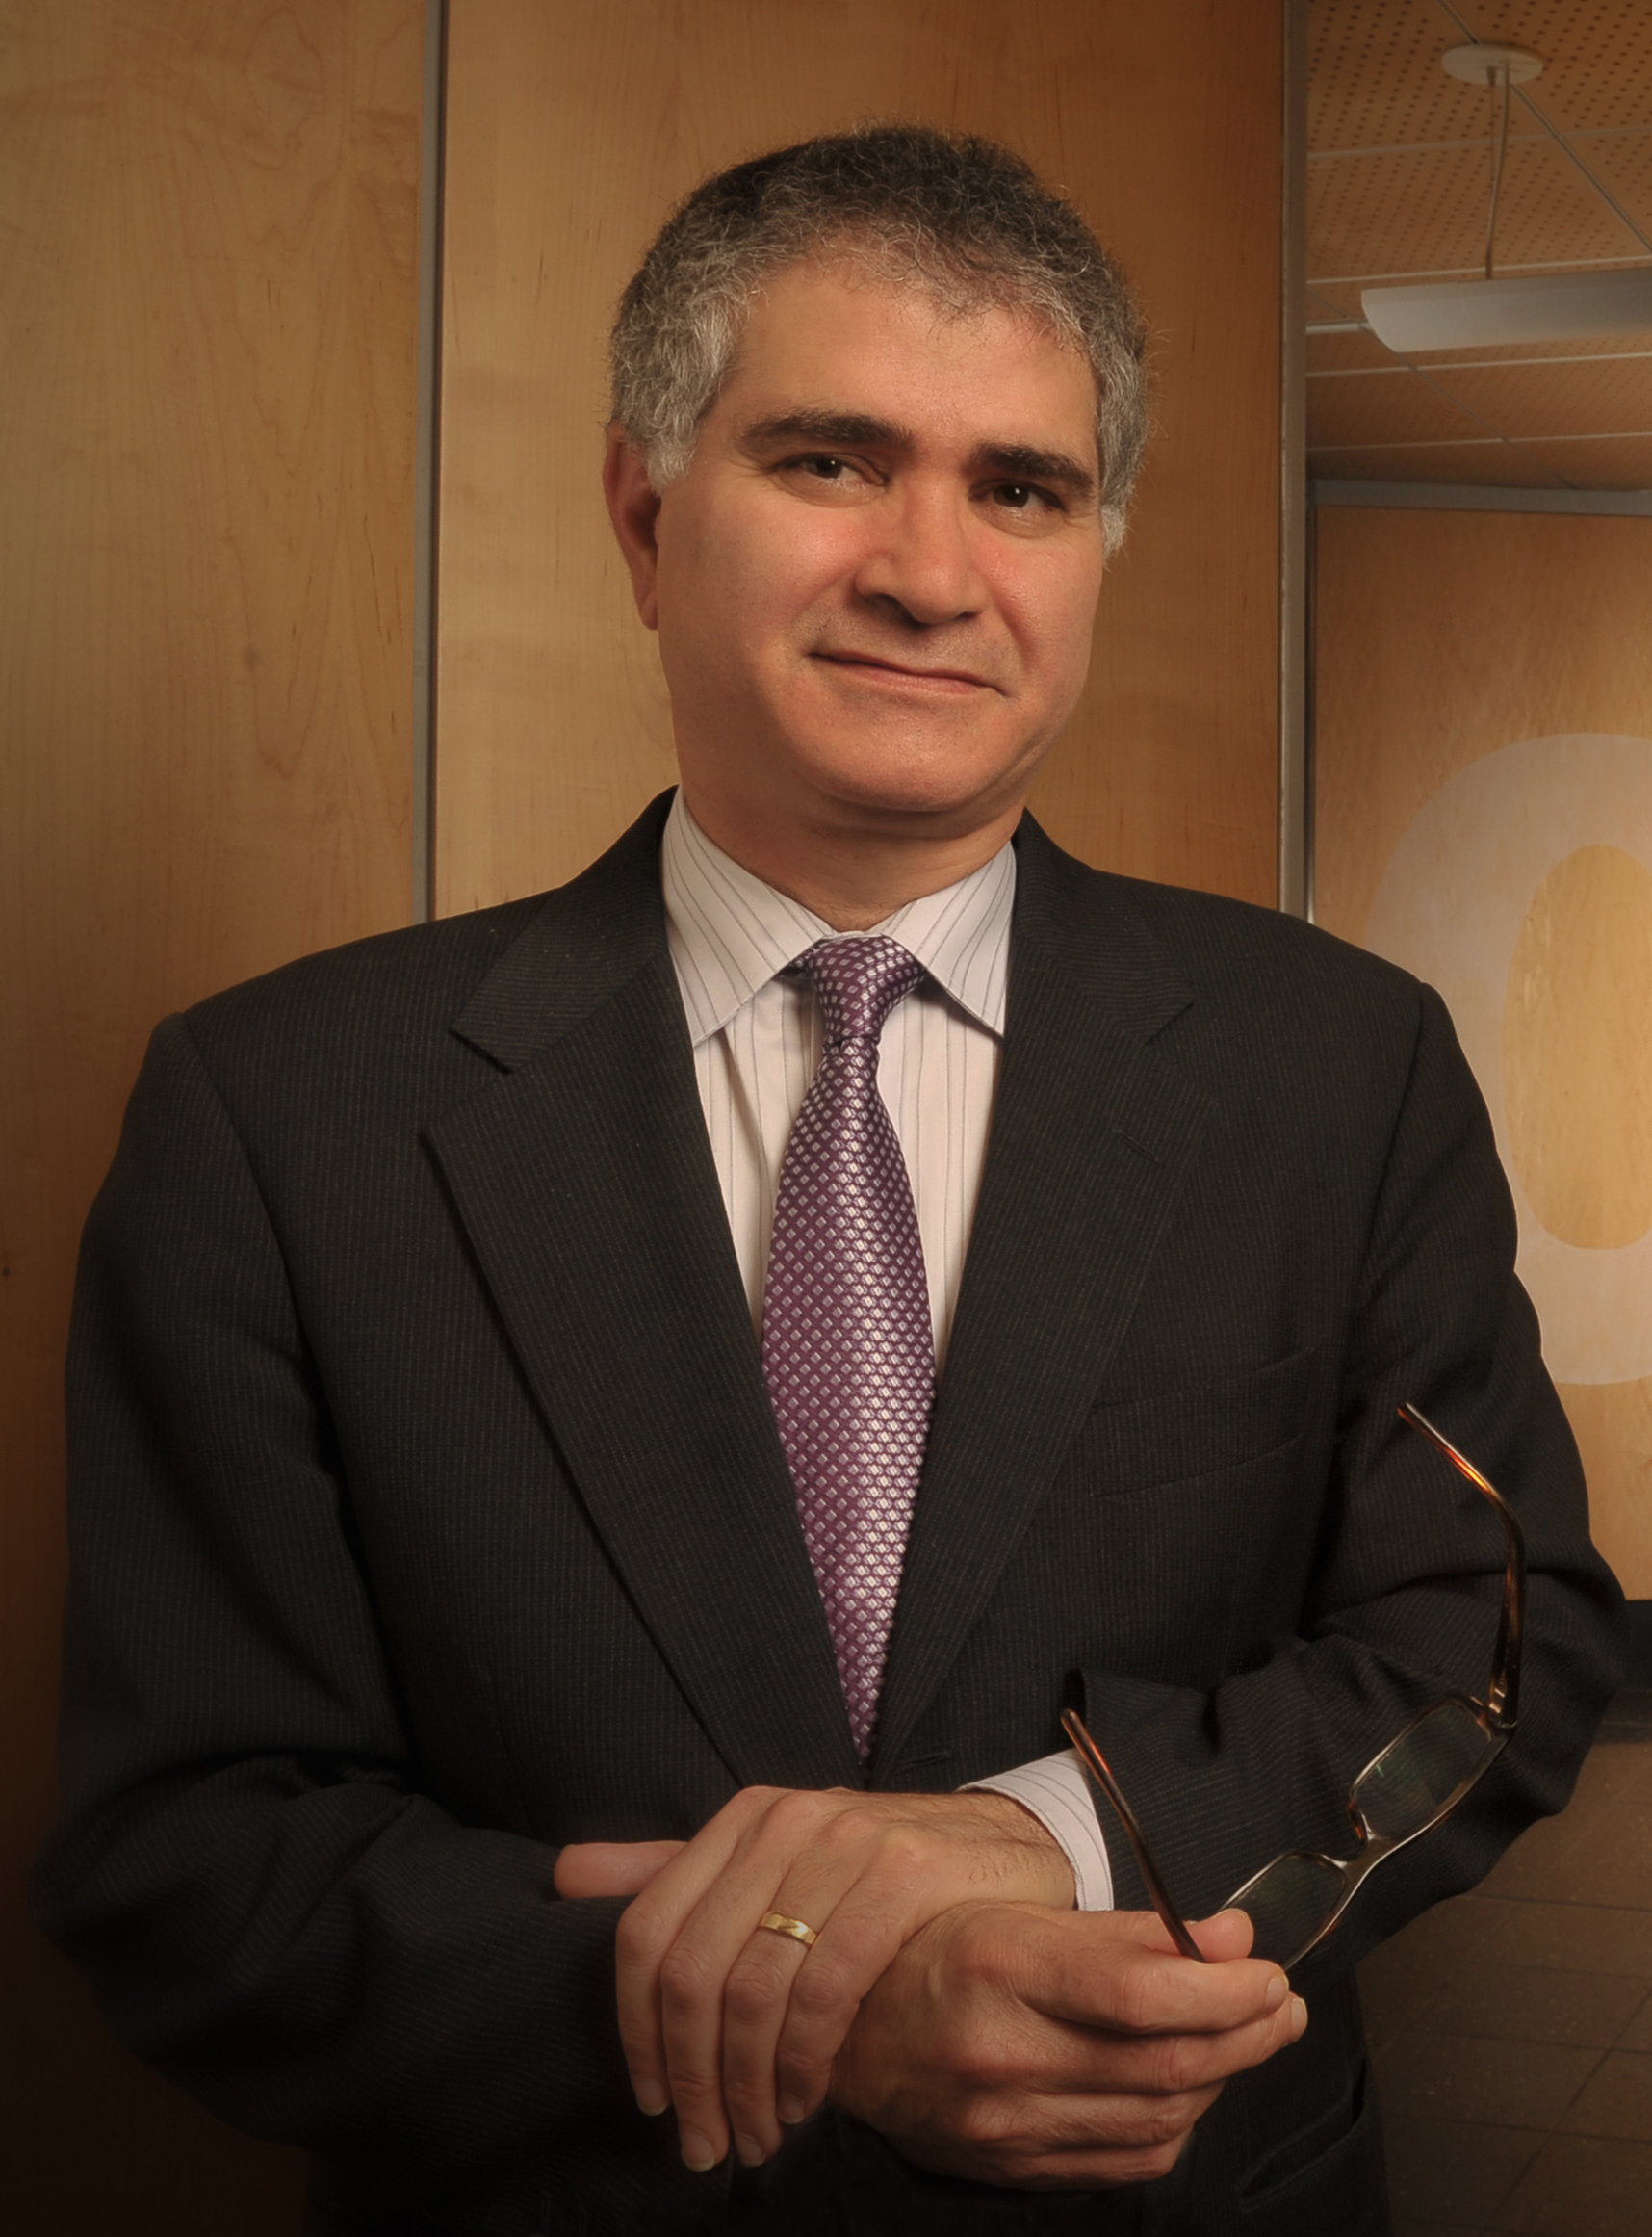 Hamid Akbari, Dean of the College of Business